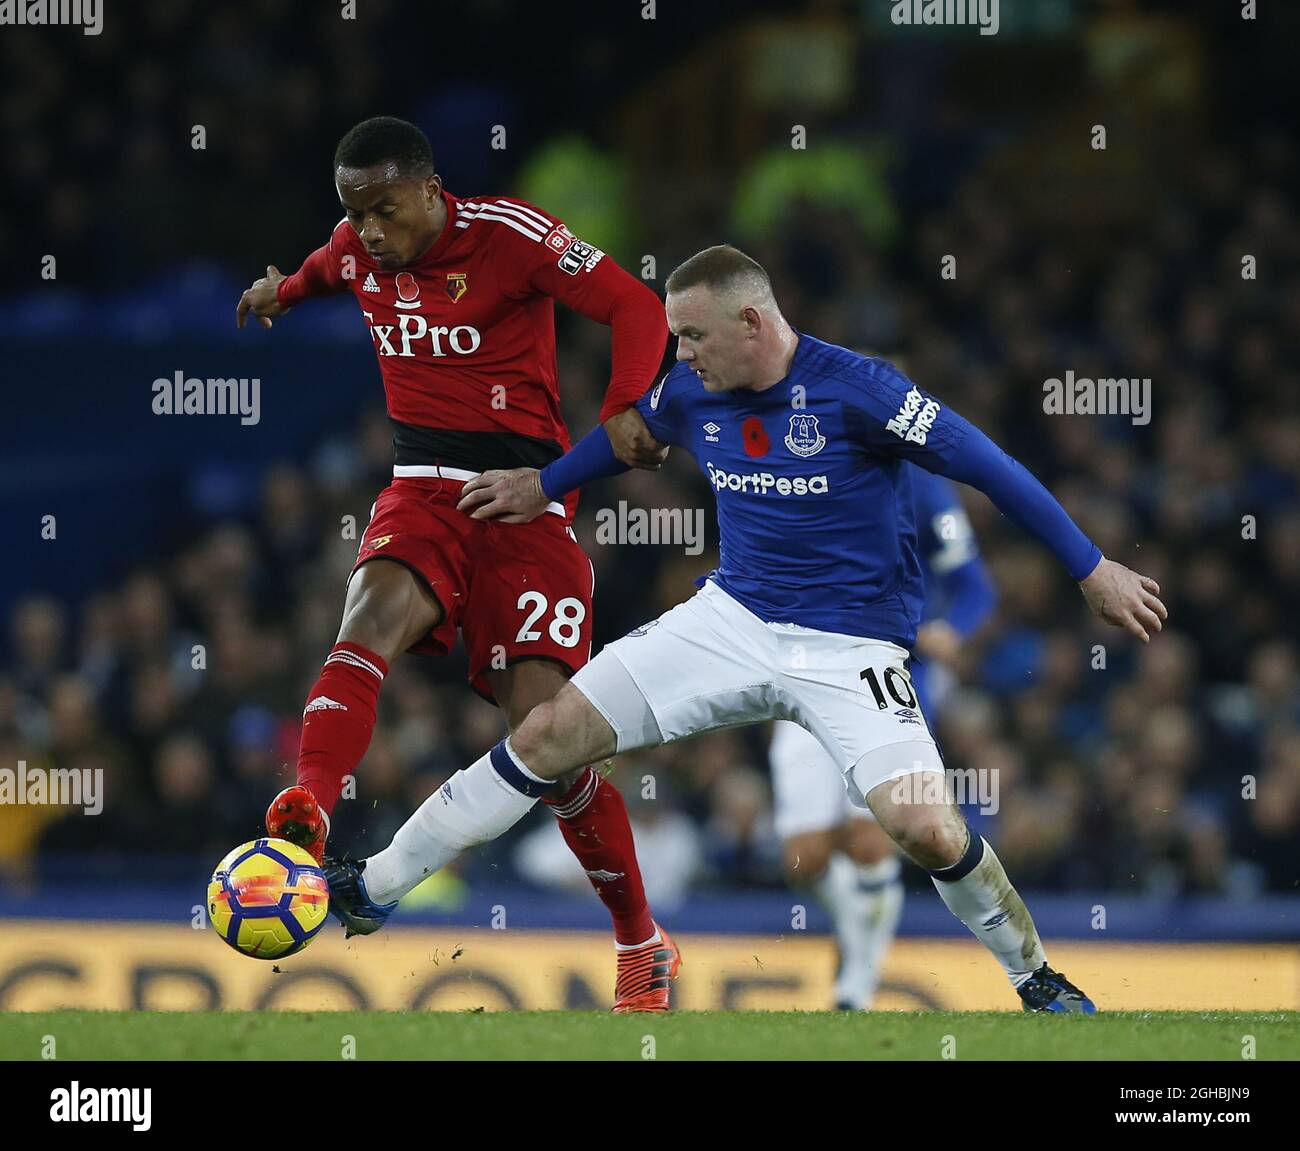 Andre Carrillo of Watford tackled by Wayne Rooney of Everton during the premier league match at Goodison Park  Stadium, Liverpool. Picture date: 5th November 2017. Picture credit should read: Andrew Yates/Sportimage via PA Images Stock Photo